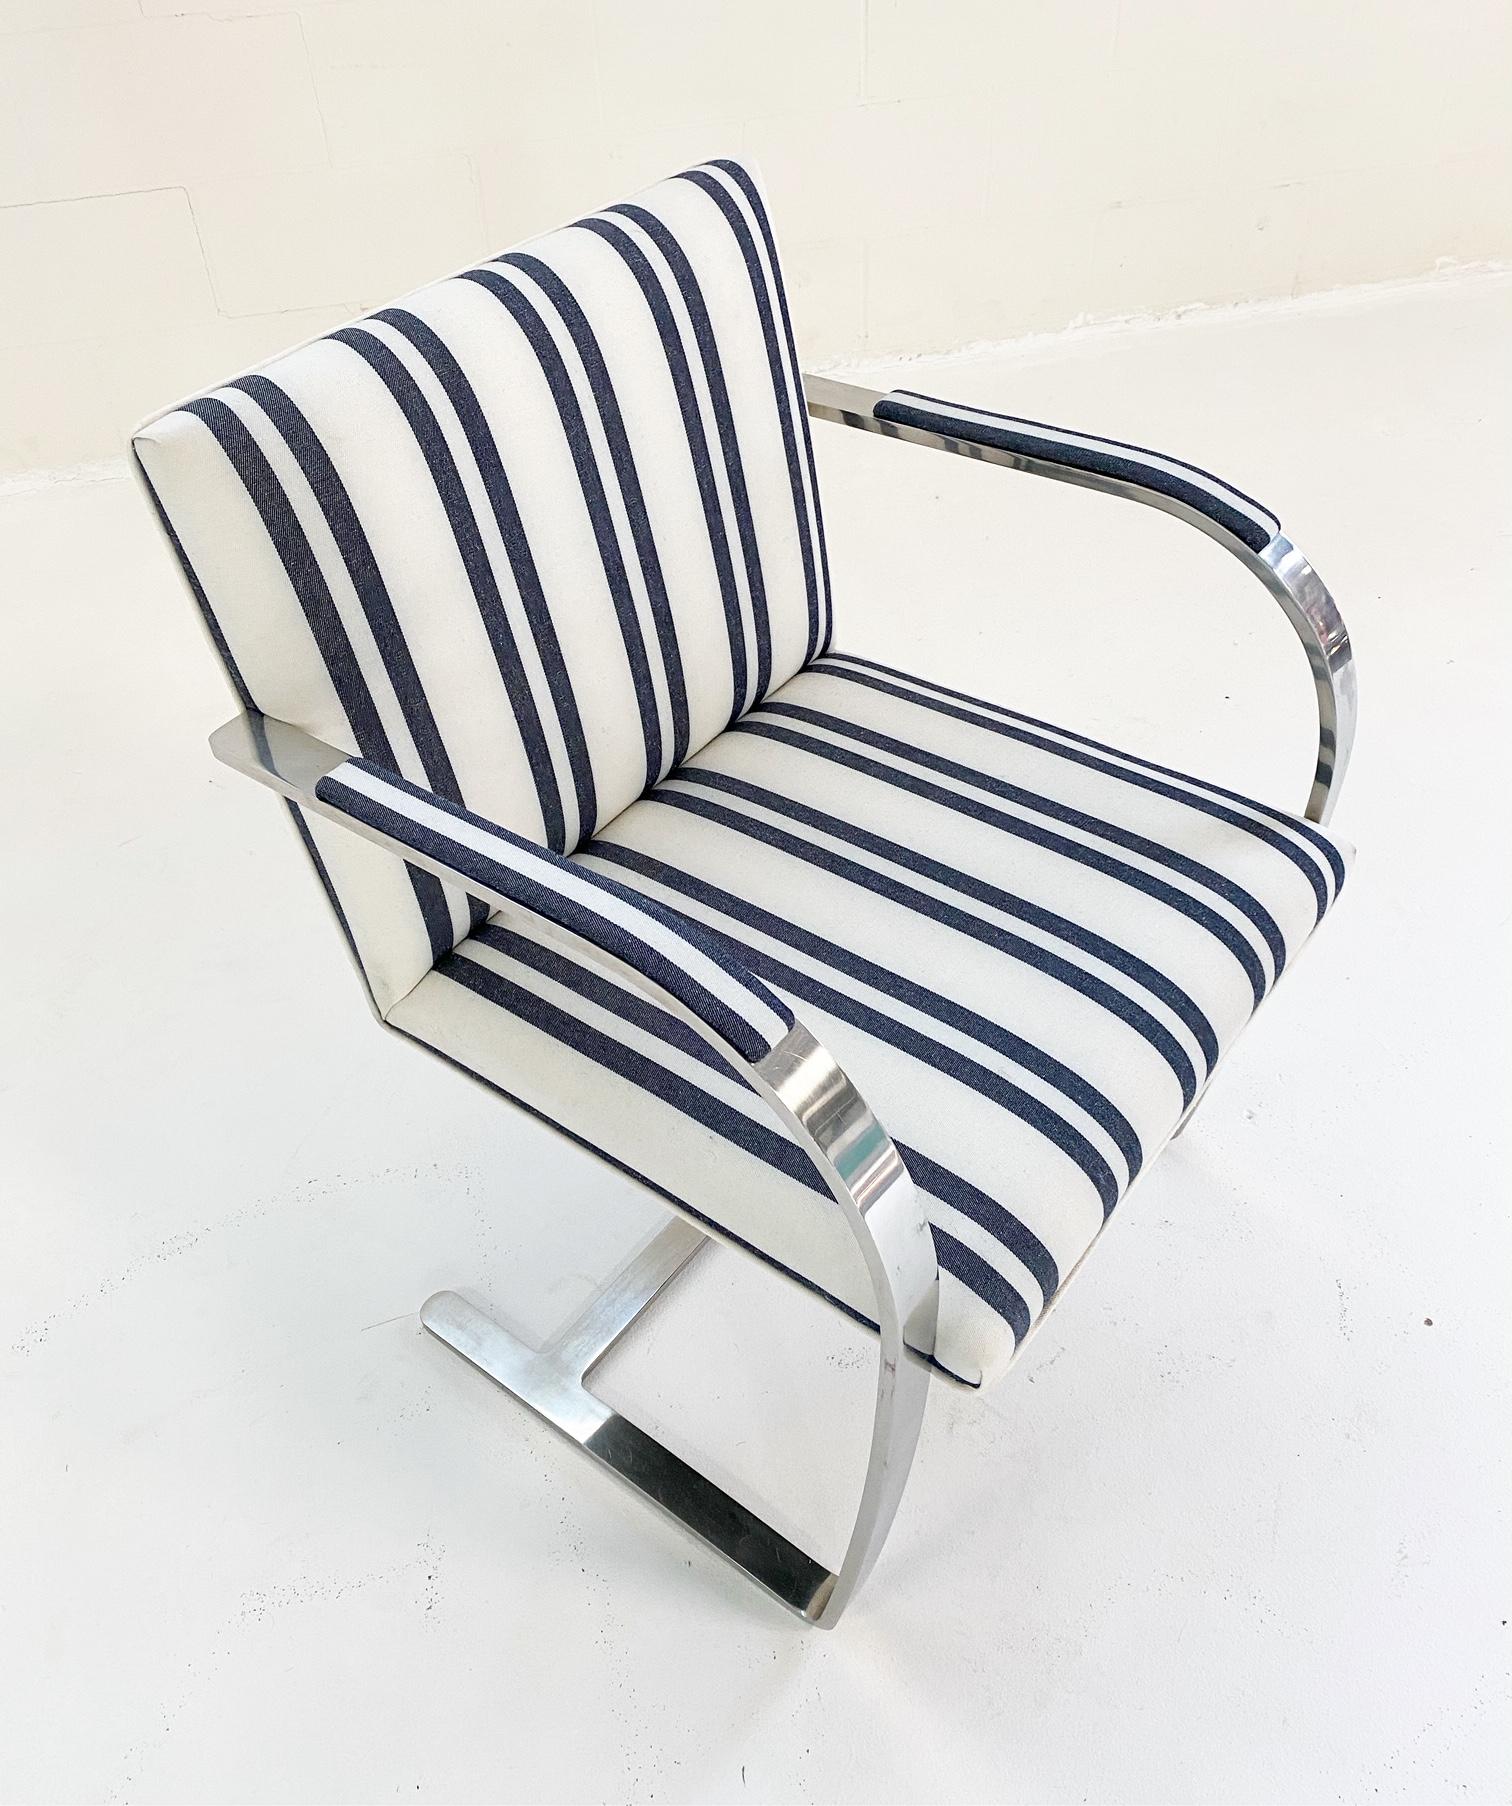 Kule x Forsyth Collection Ludwig Mies van der Rohe Brno Chair 3